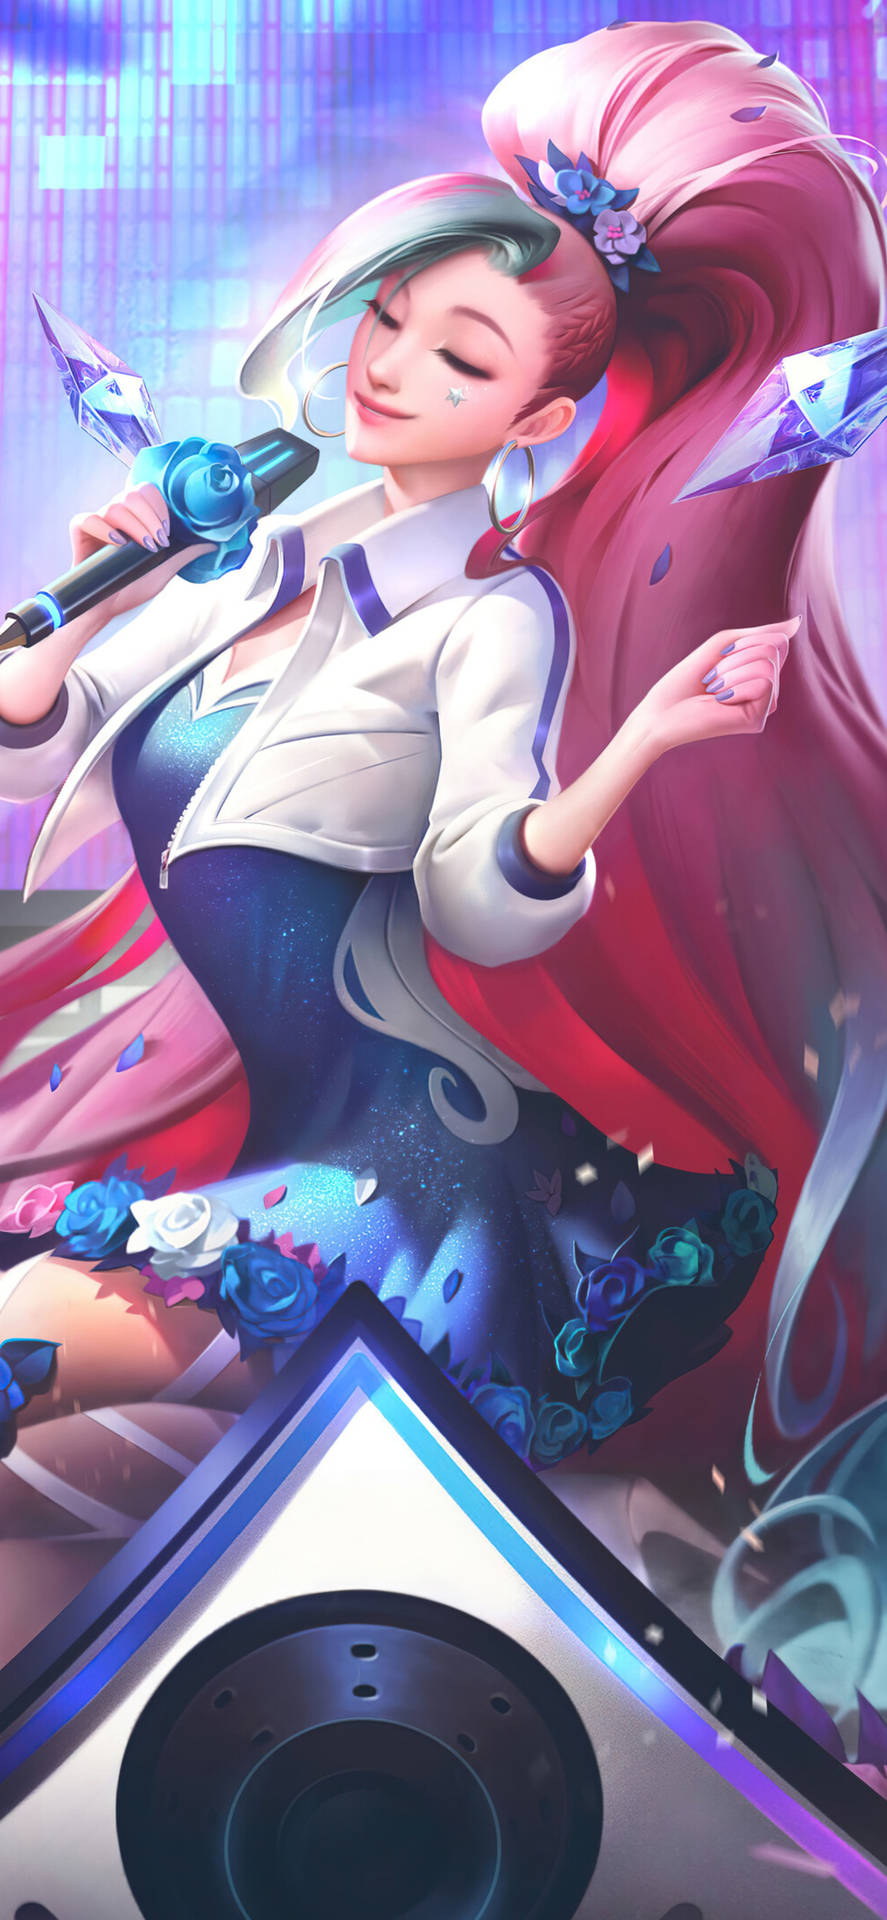 KDA All Out Seraphine LoL iPhone Wallpaper